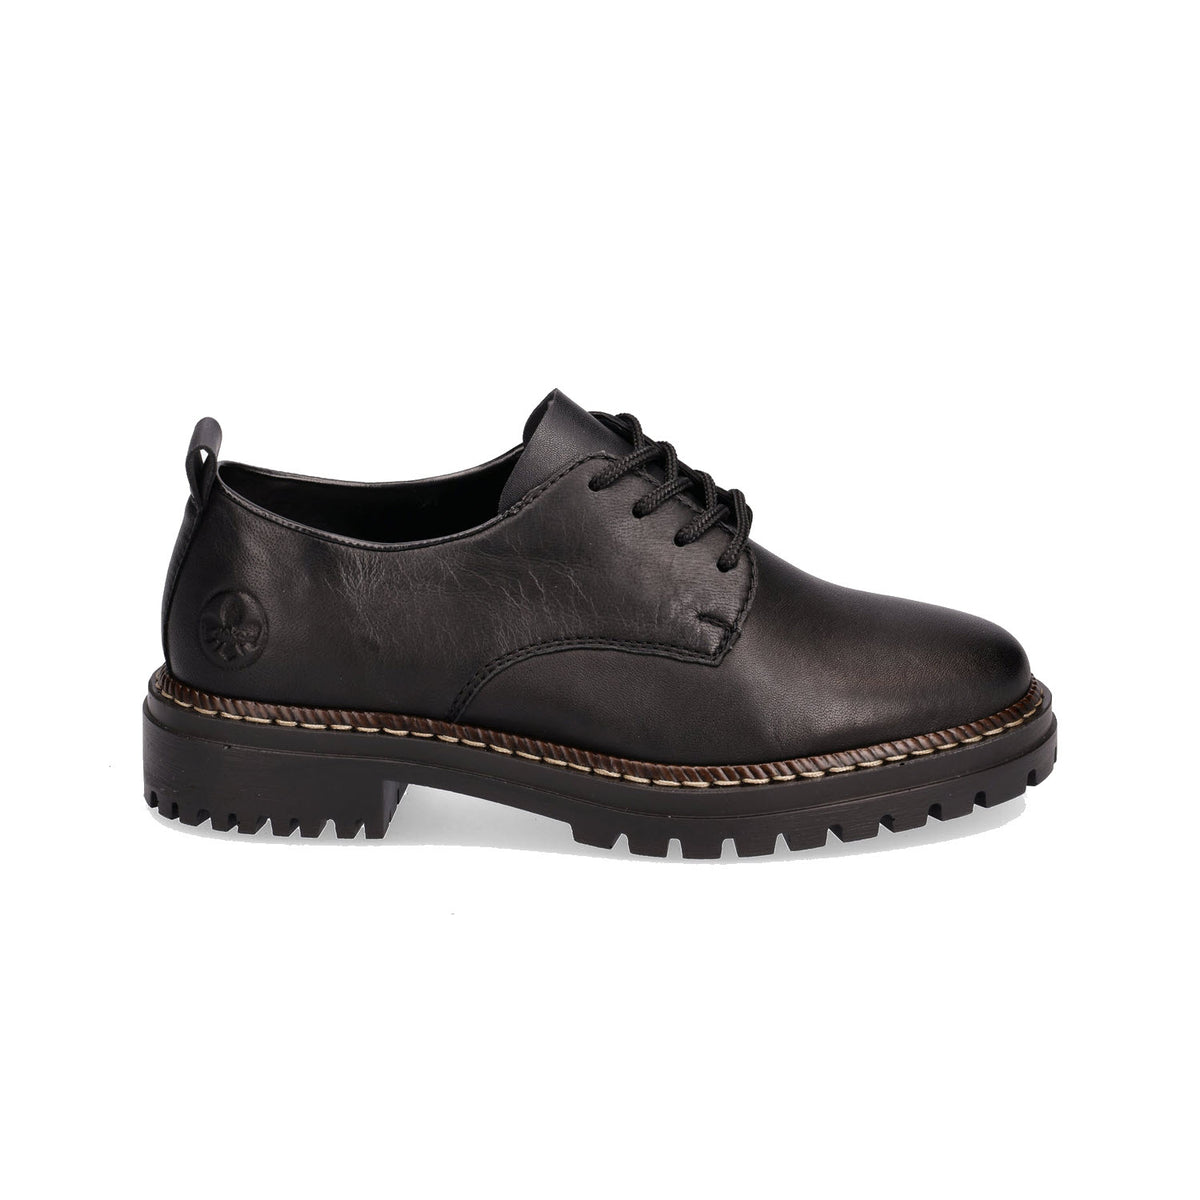 Replace with: Rieker black leather derby business shoe with antistress qualities, contrast stitching, and a rugged sole.